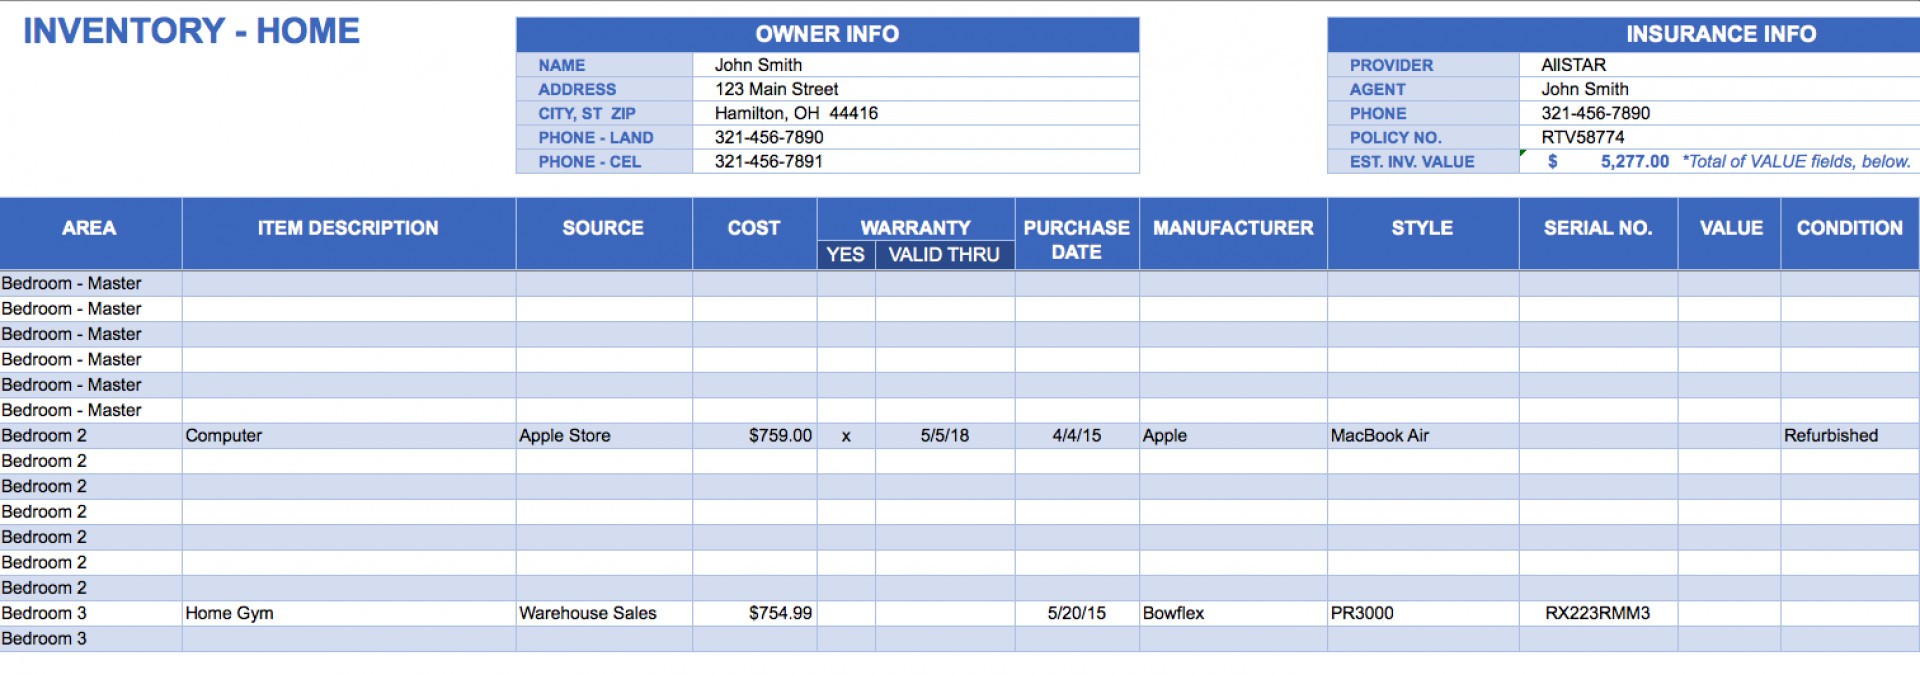 Free Excel Asset Inventory Template intended for Excel Asset Inventory Template xls